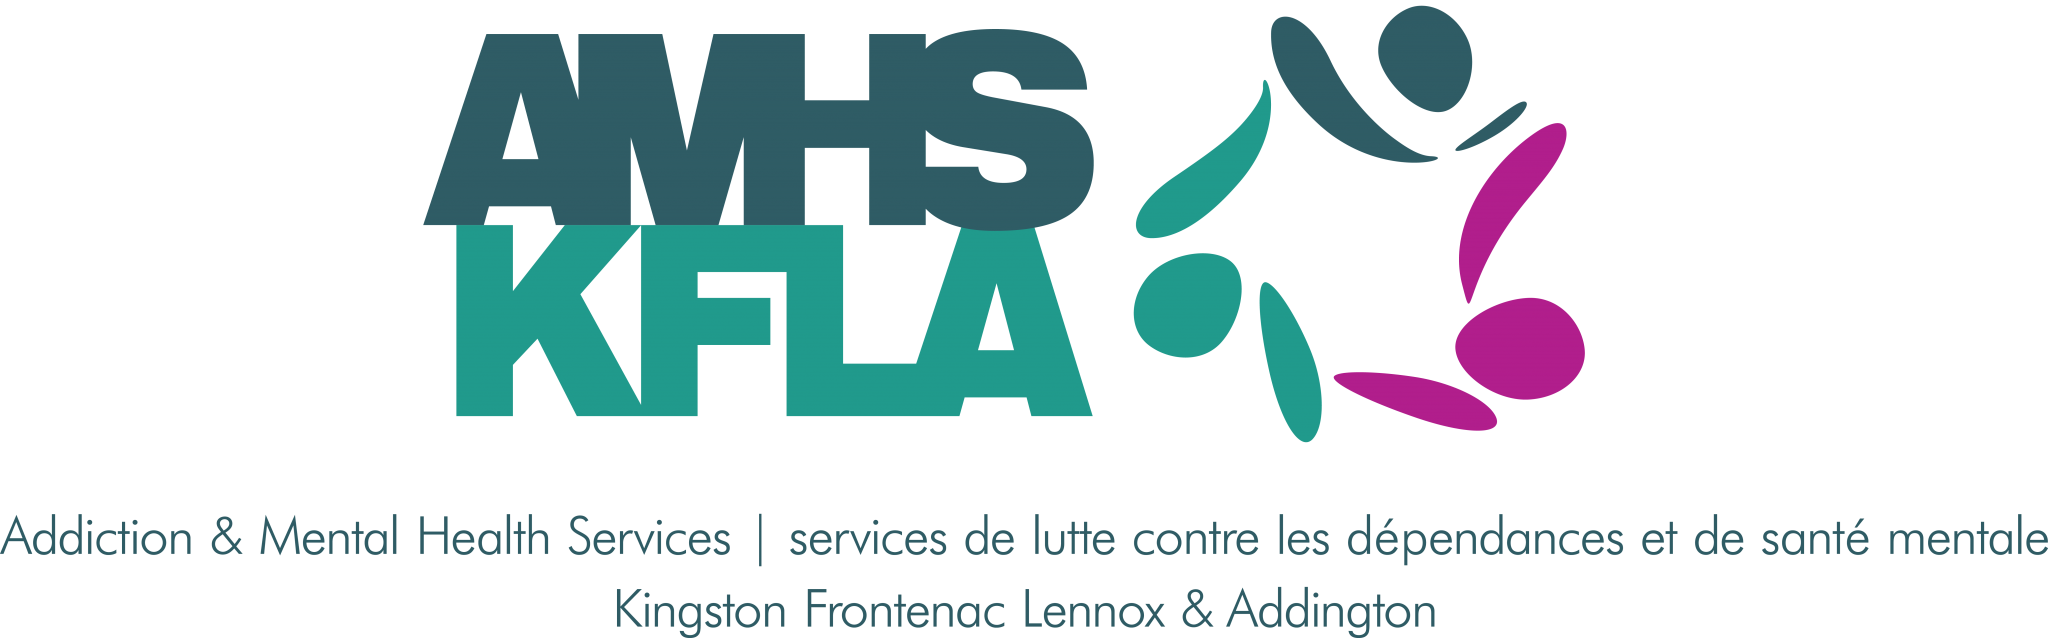 Addictions and Mental Health Services Kingston Frontenac Lennox Addington Logo that reads AMHS stacked on top of KFLA in coloured letters